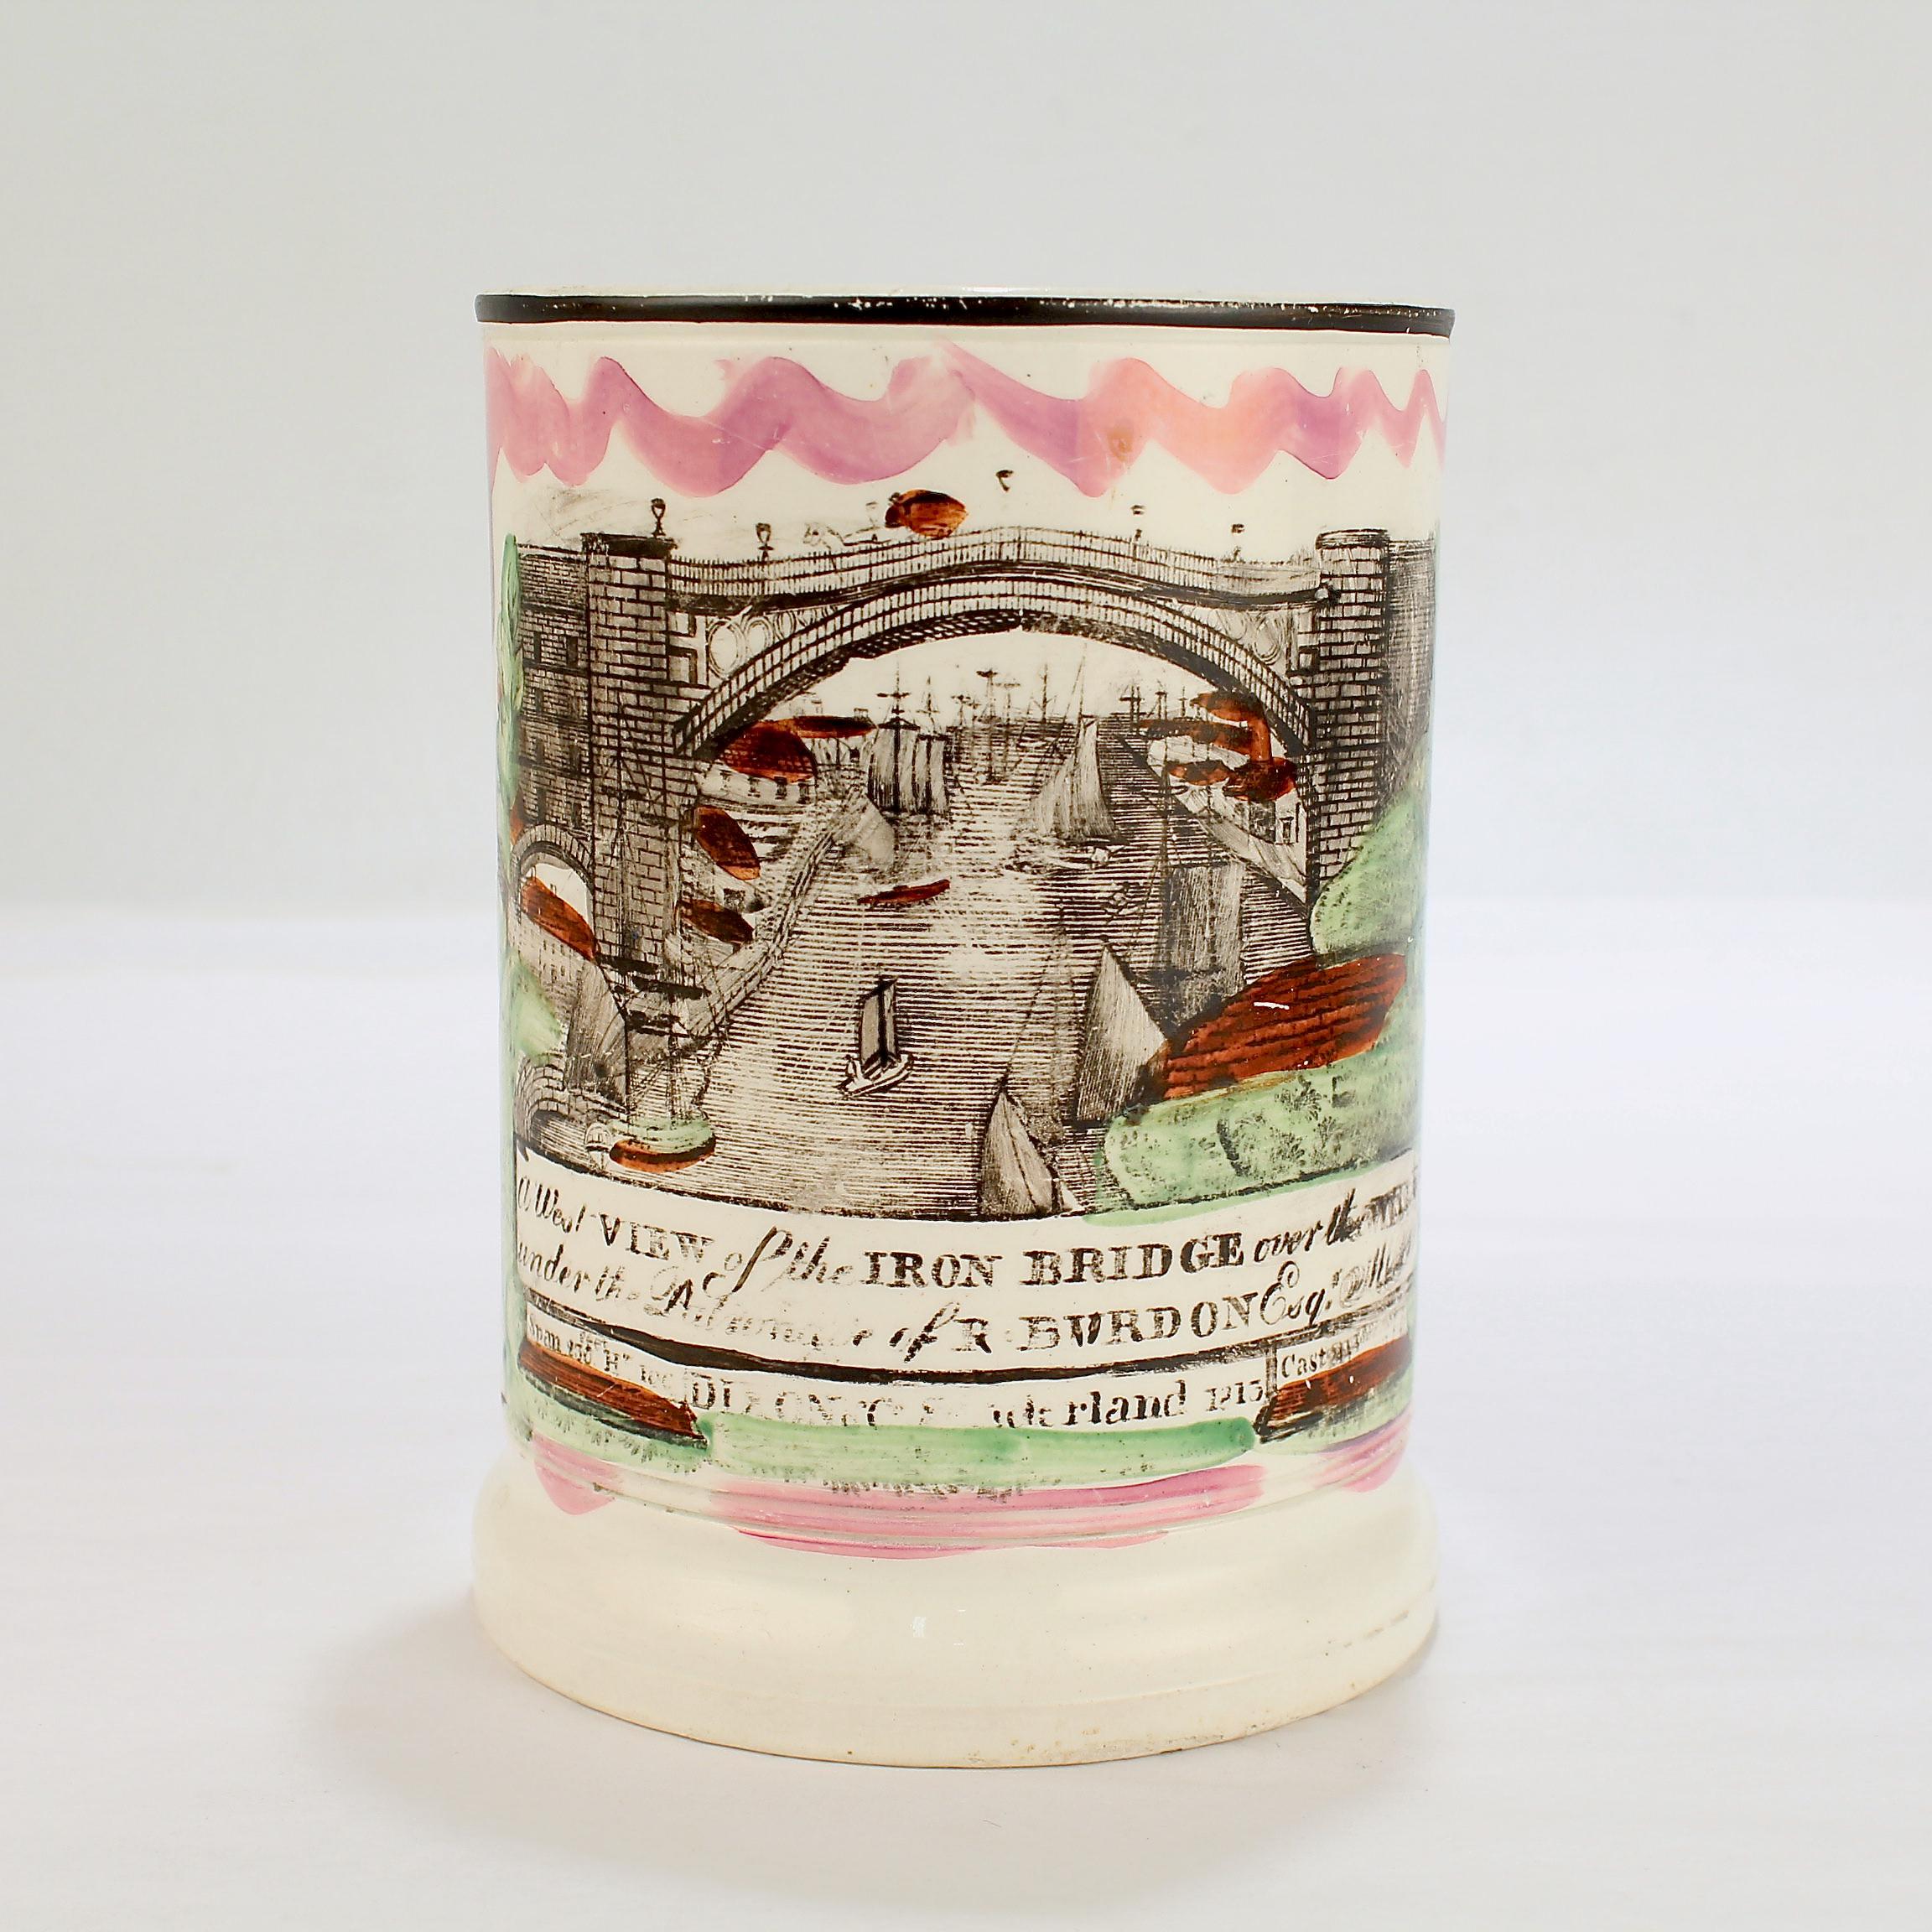 A fine antique English Sunderland Lustre creamware frog beer mug or cup.

With of transfer of the Iron Bridge from Shropshire, England, which fords the River Severn and was the first bridge in the world ever constructed of cast iron in 1781.